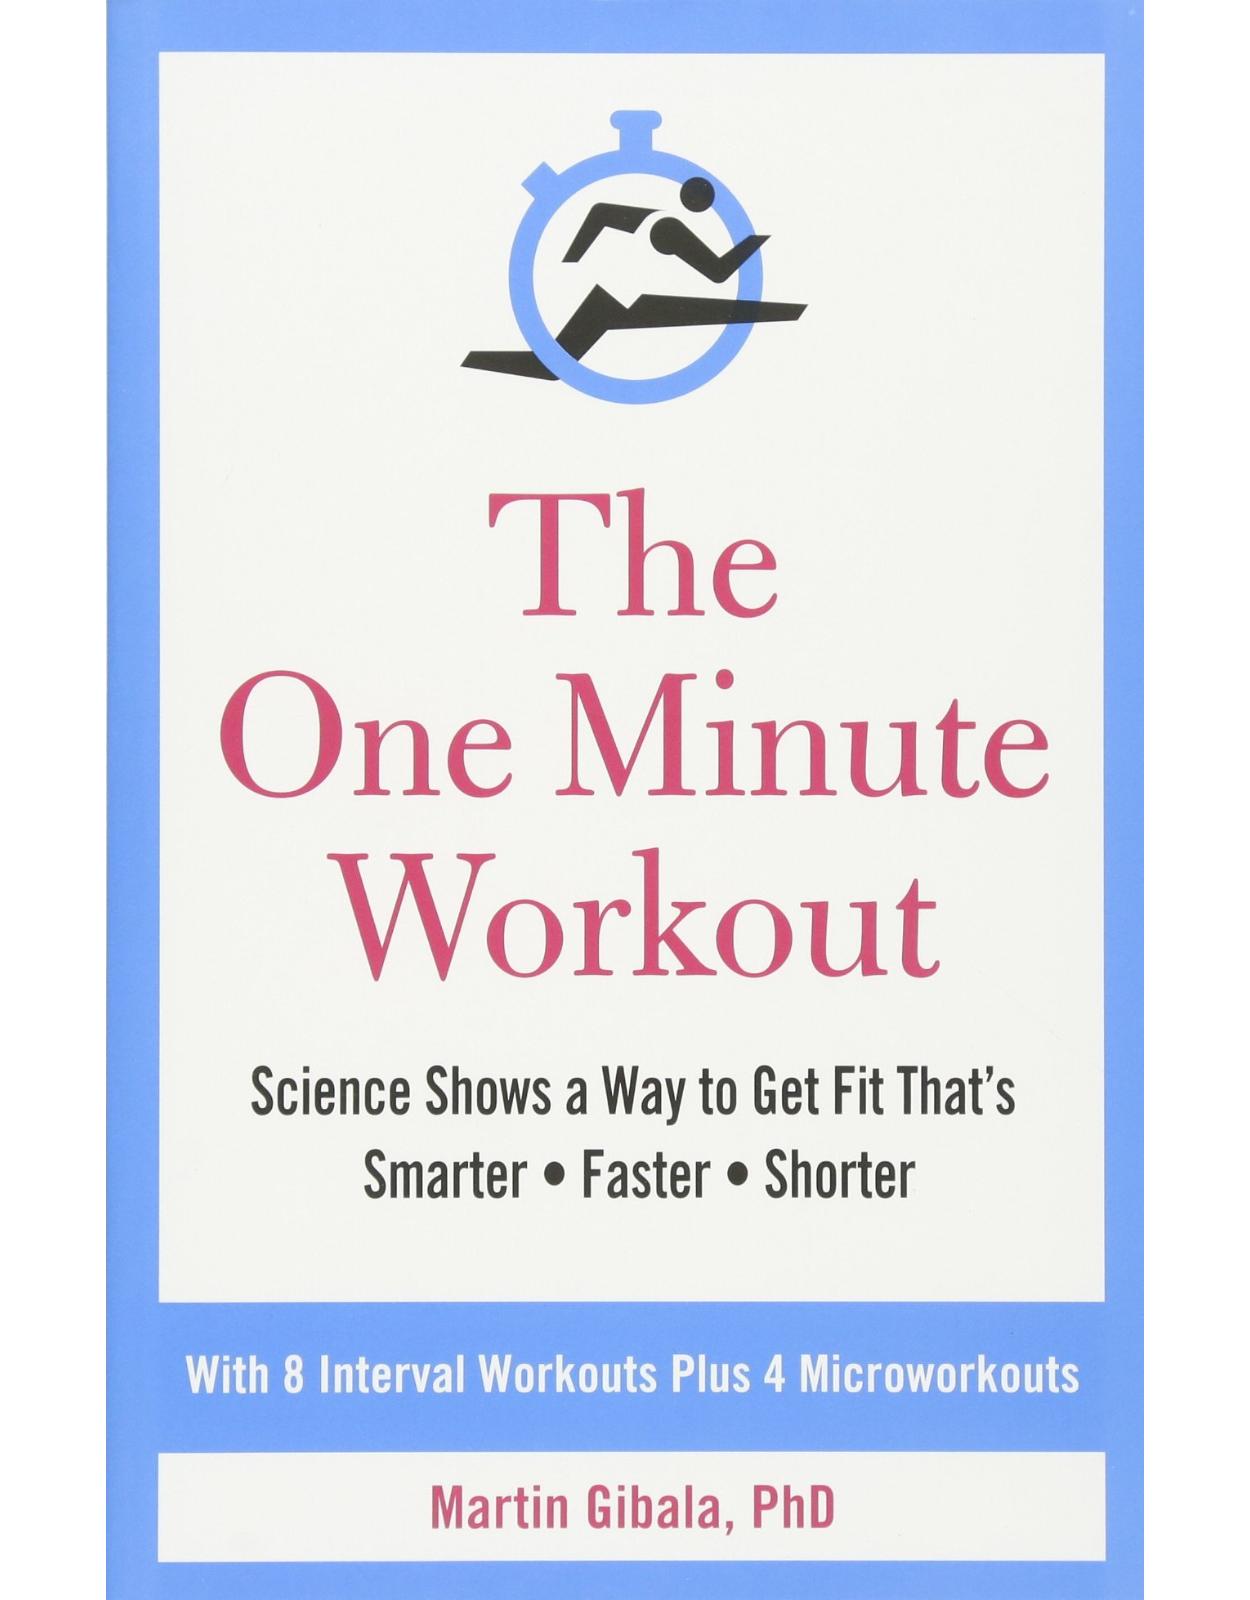 The One Minute Workout